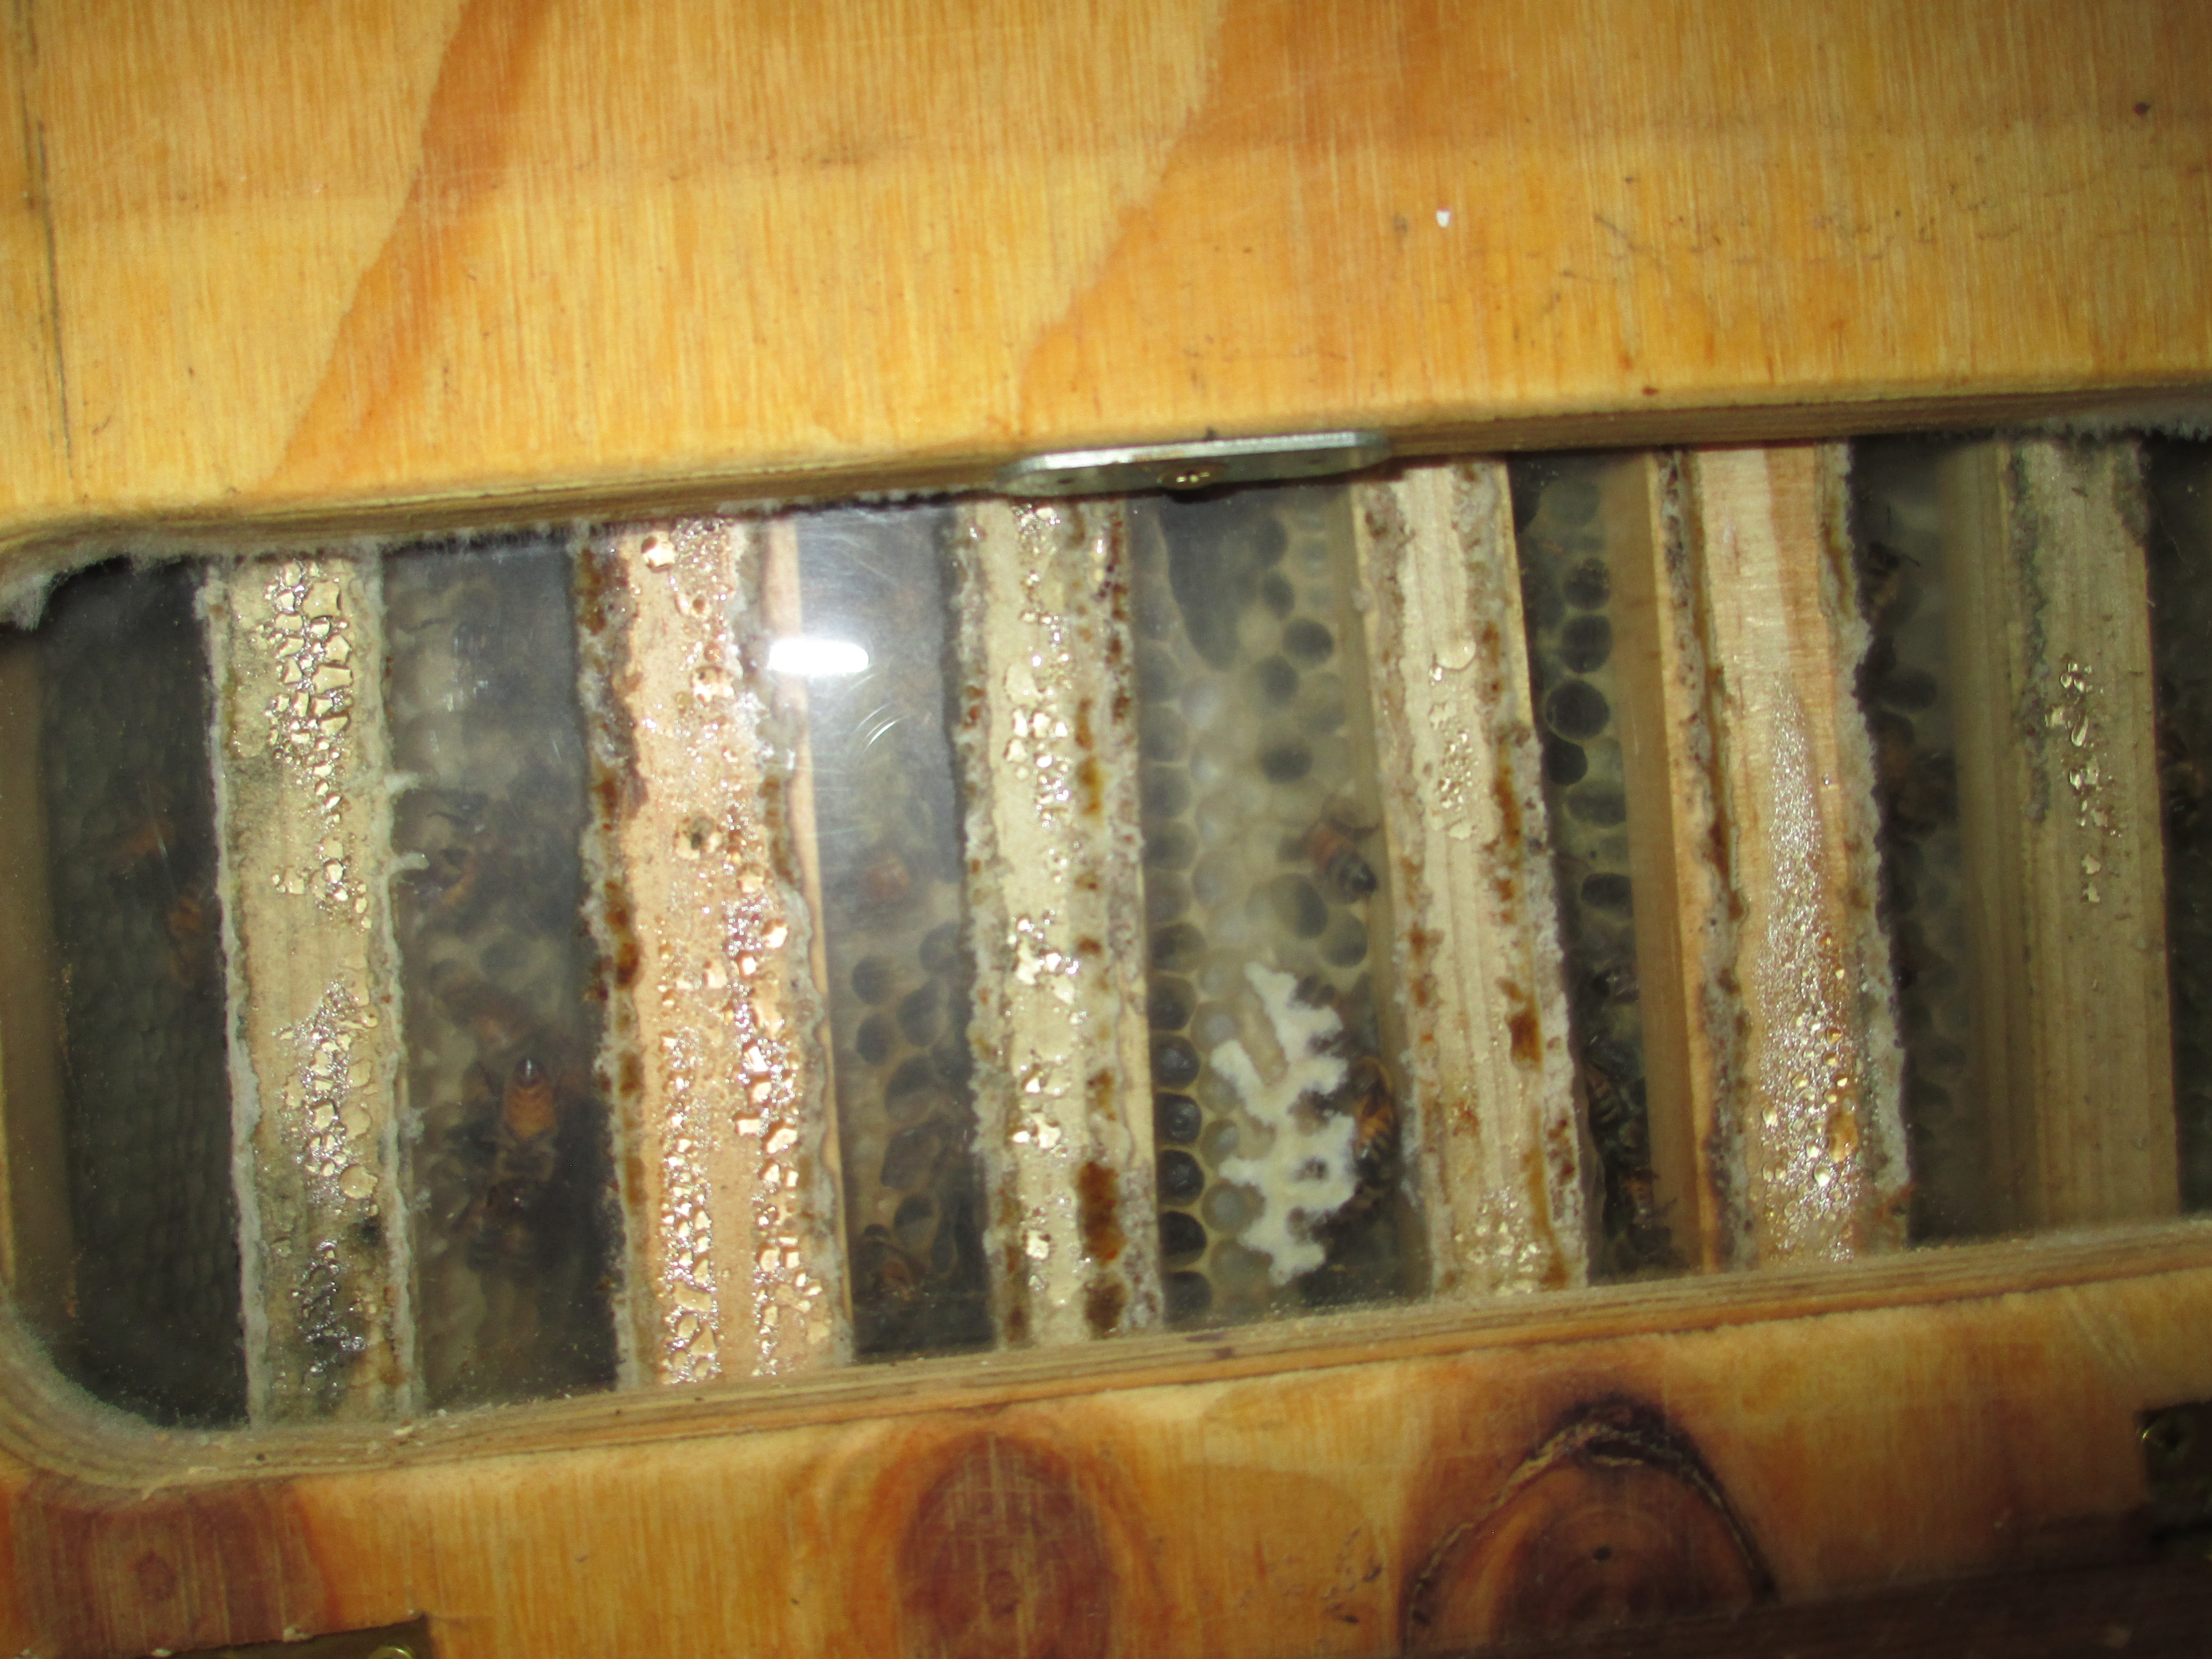 condensation inside the hive